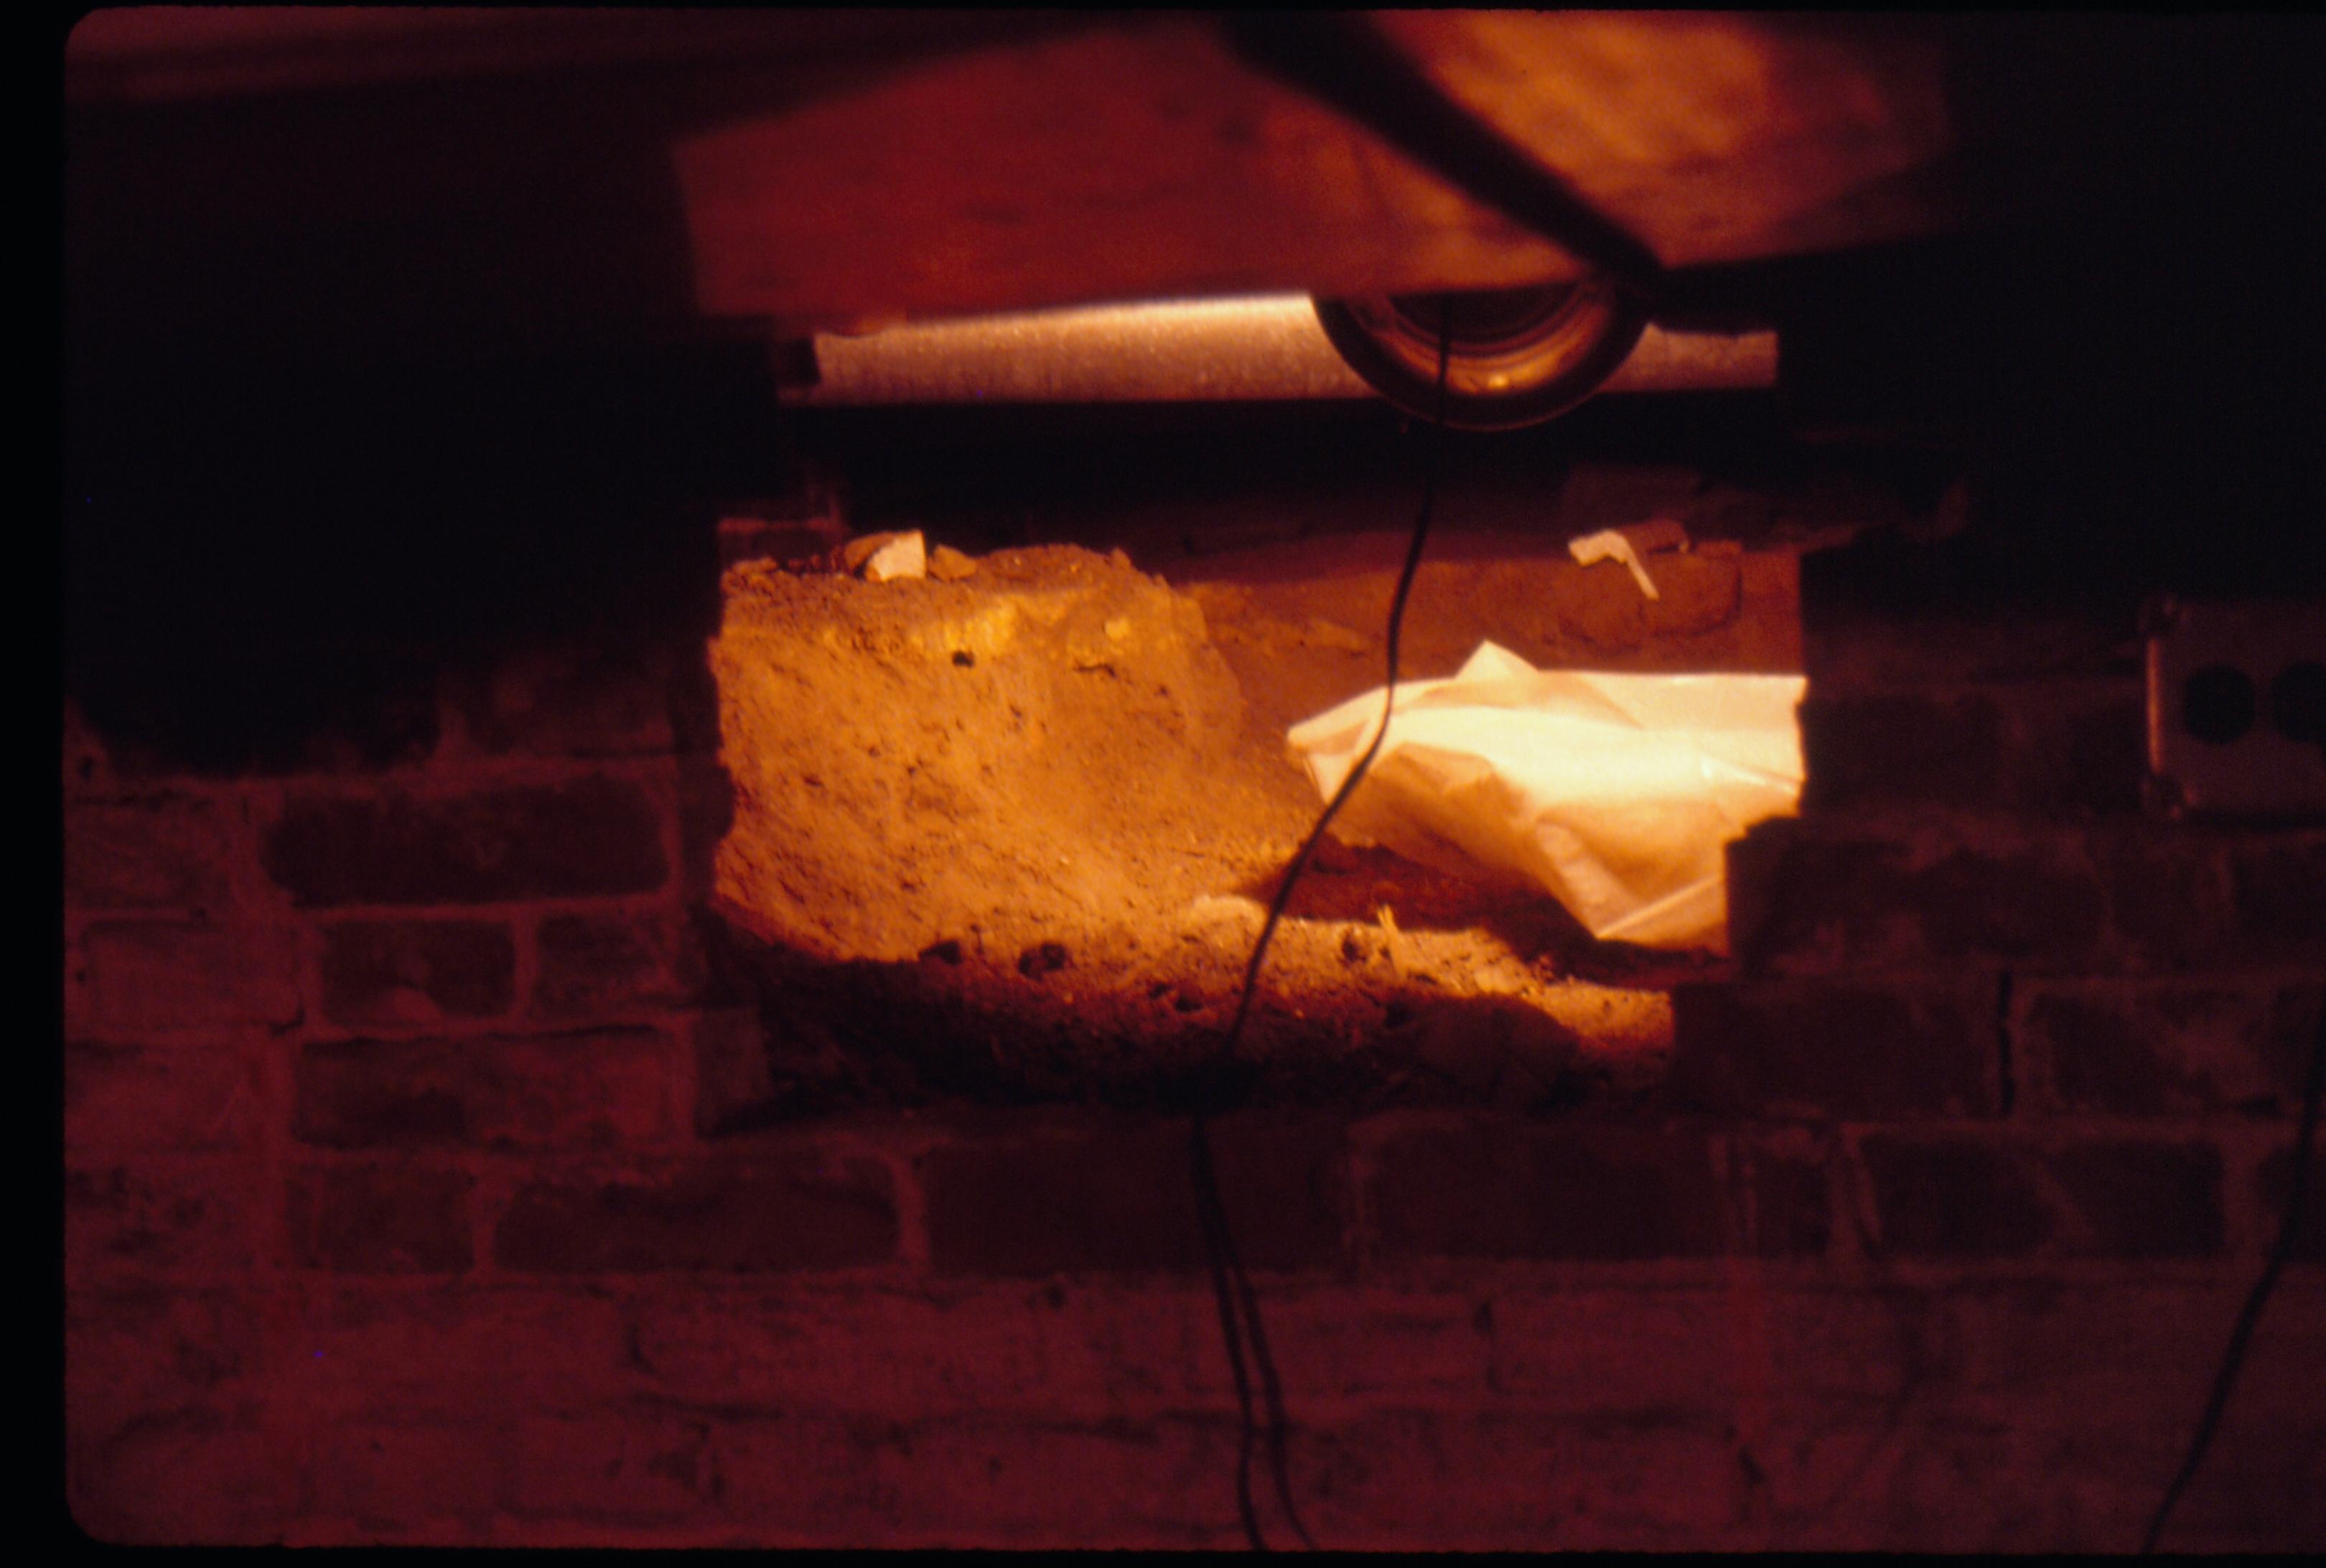 Lyon House - Crawlspace showing wires hanging from ceiling for safety light hangin in opening of brick wall. Opening in wall has dirt, sand, and white plastic bag?  Looking East in basement Lyon, Basement, brick wall, crawlspace